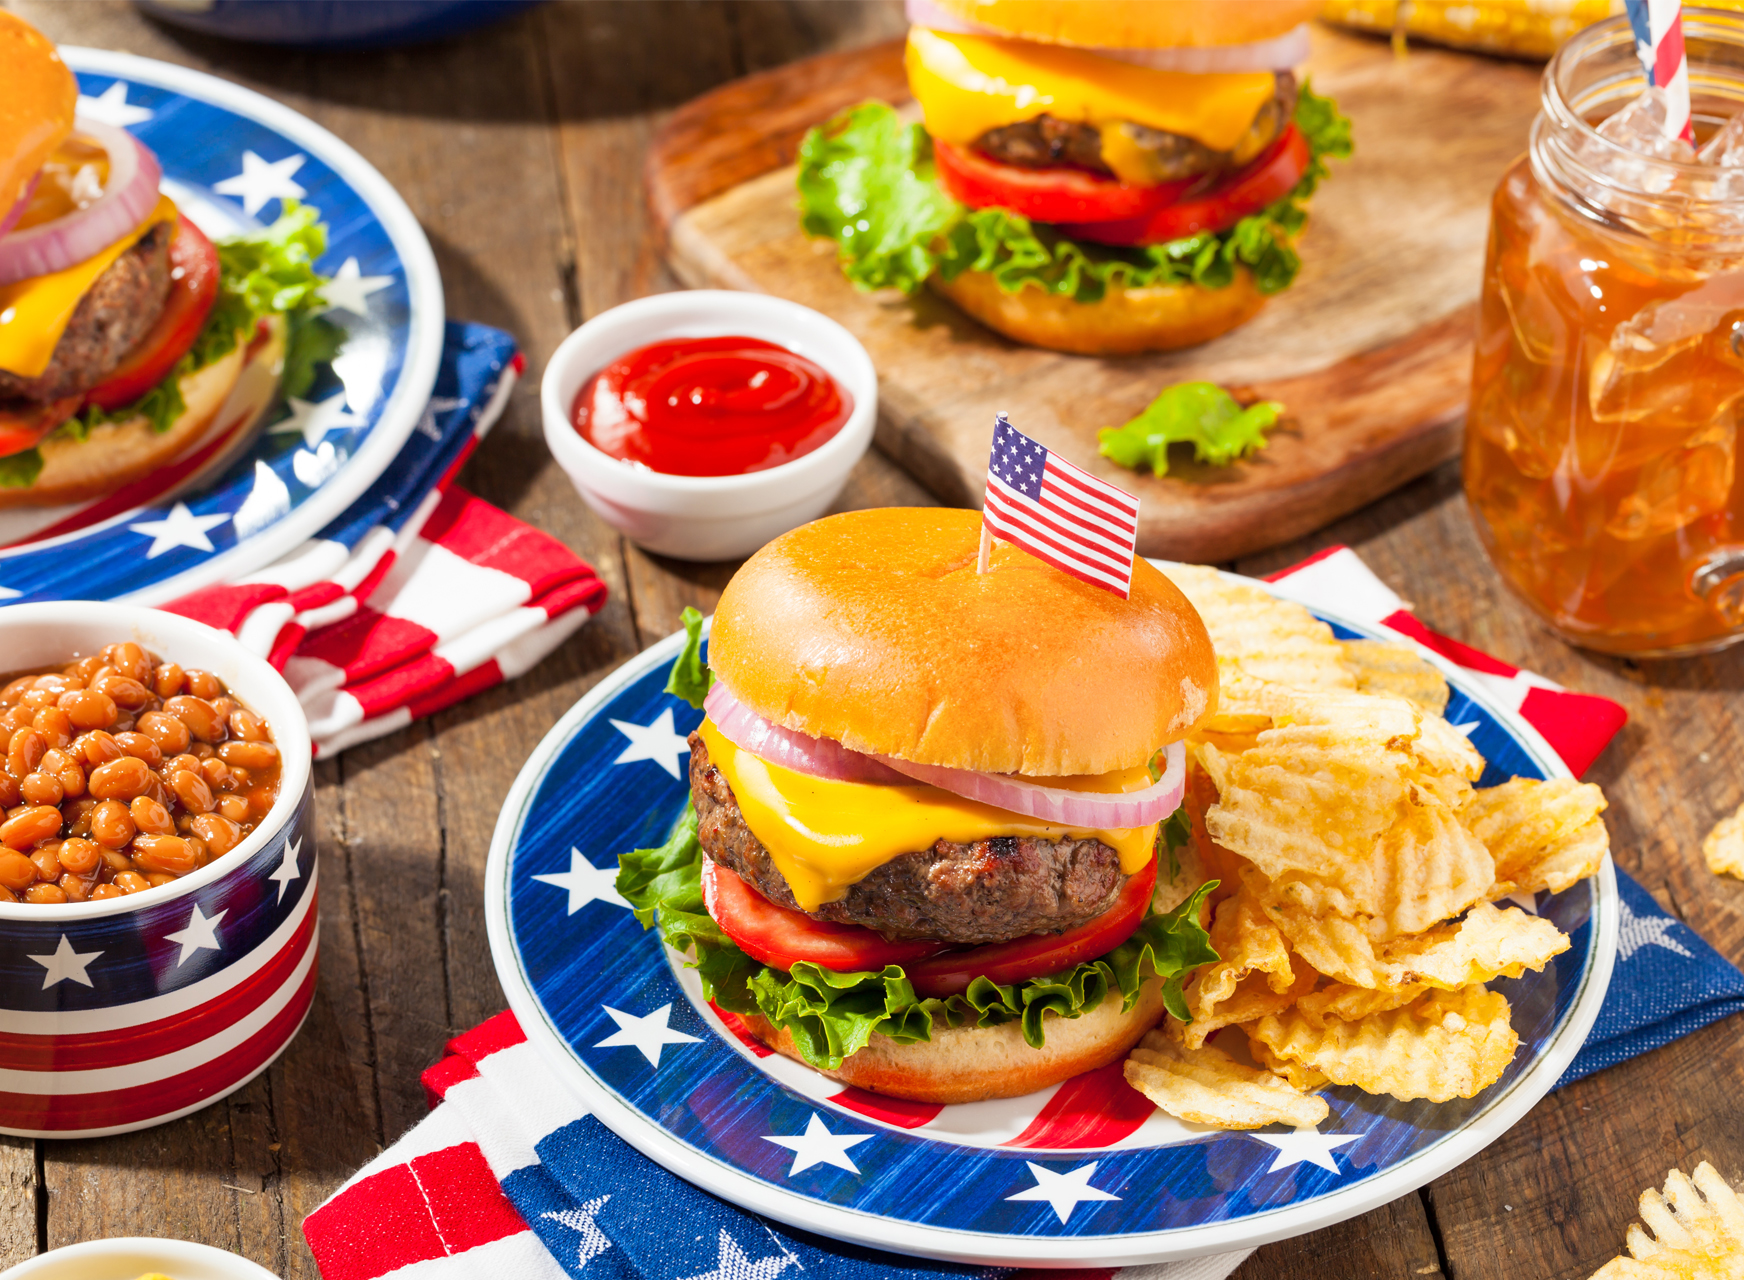 Top 5 America’s most popular food to try - Travel Center Blog